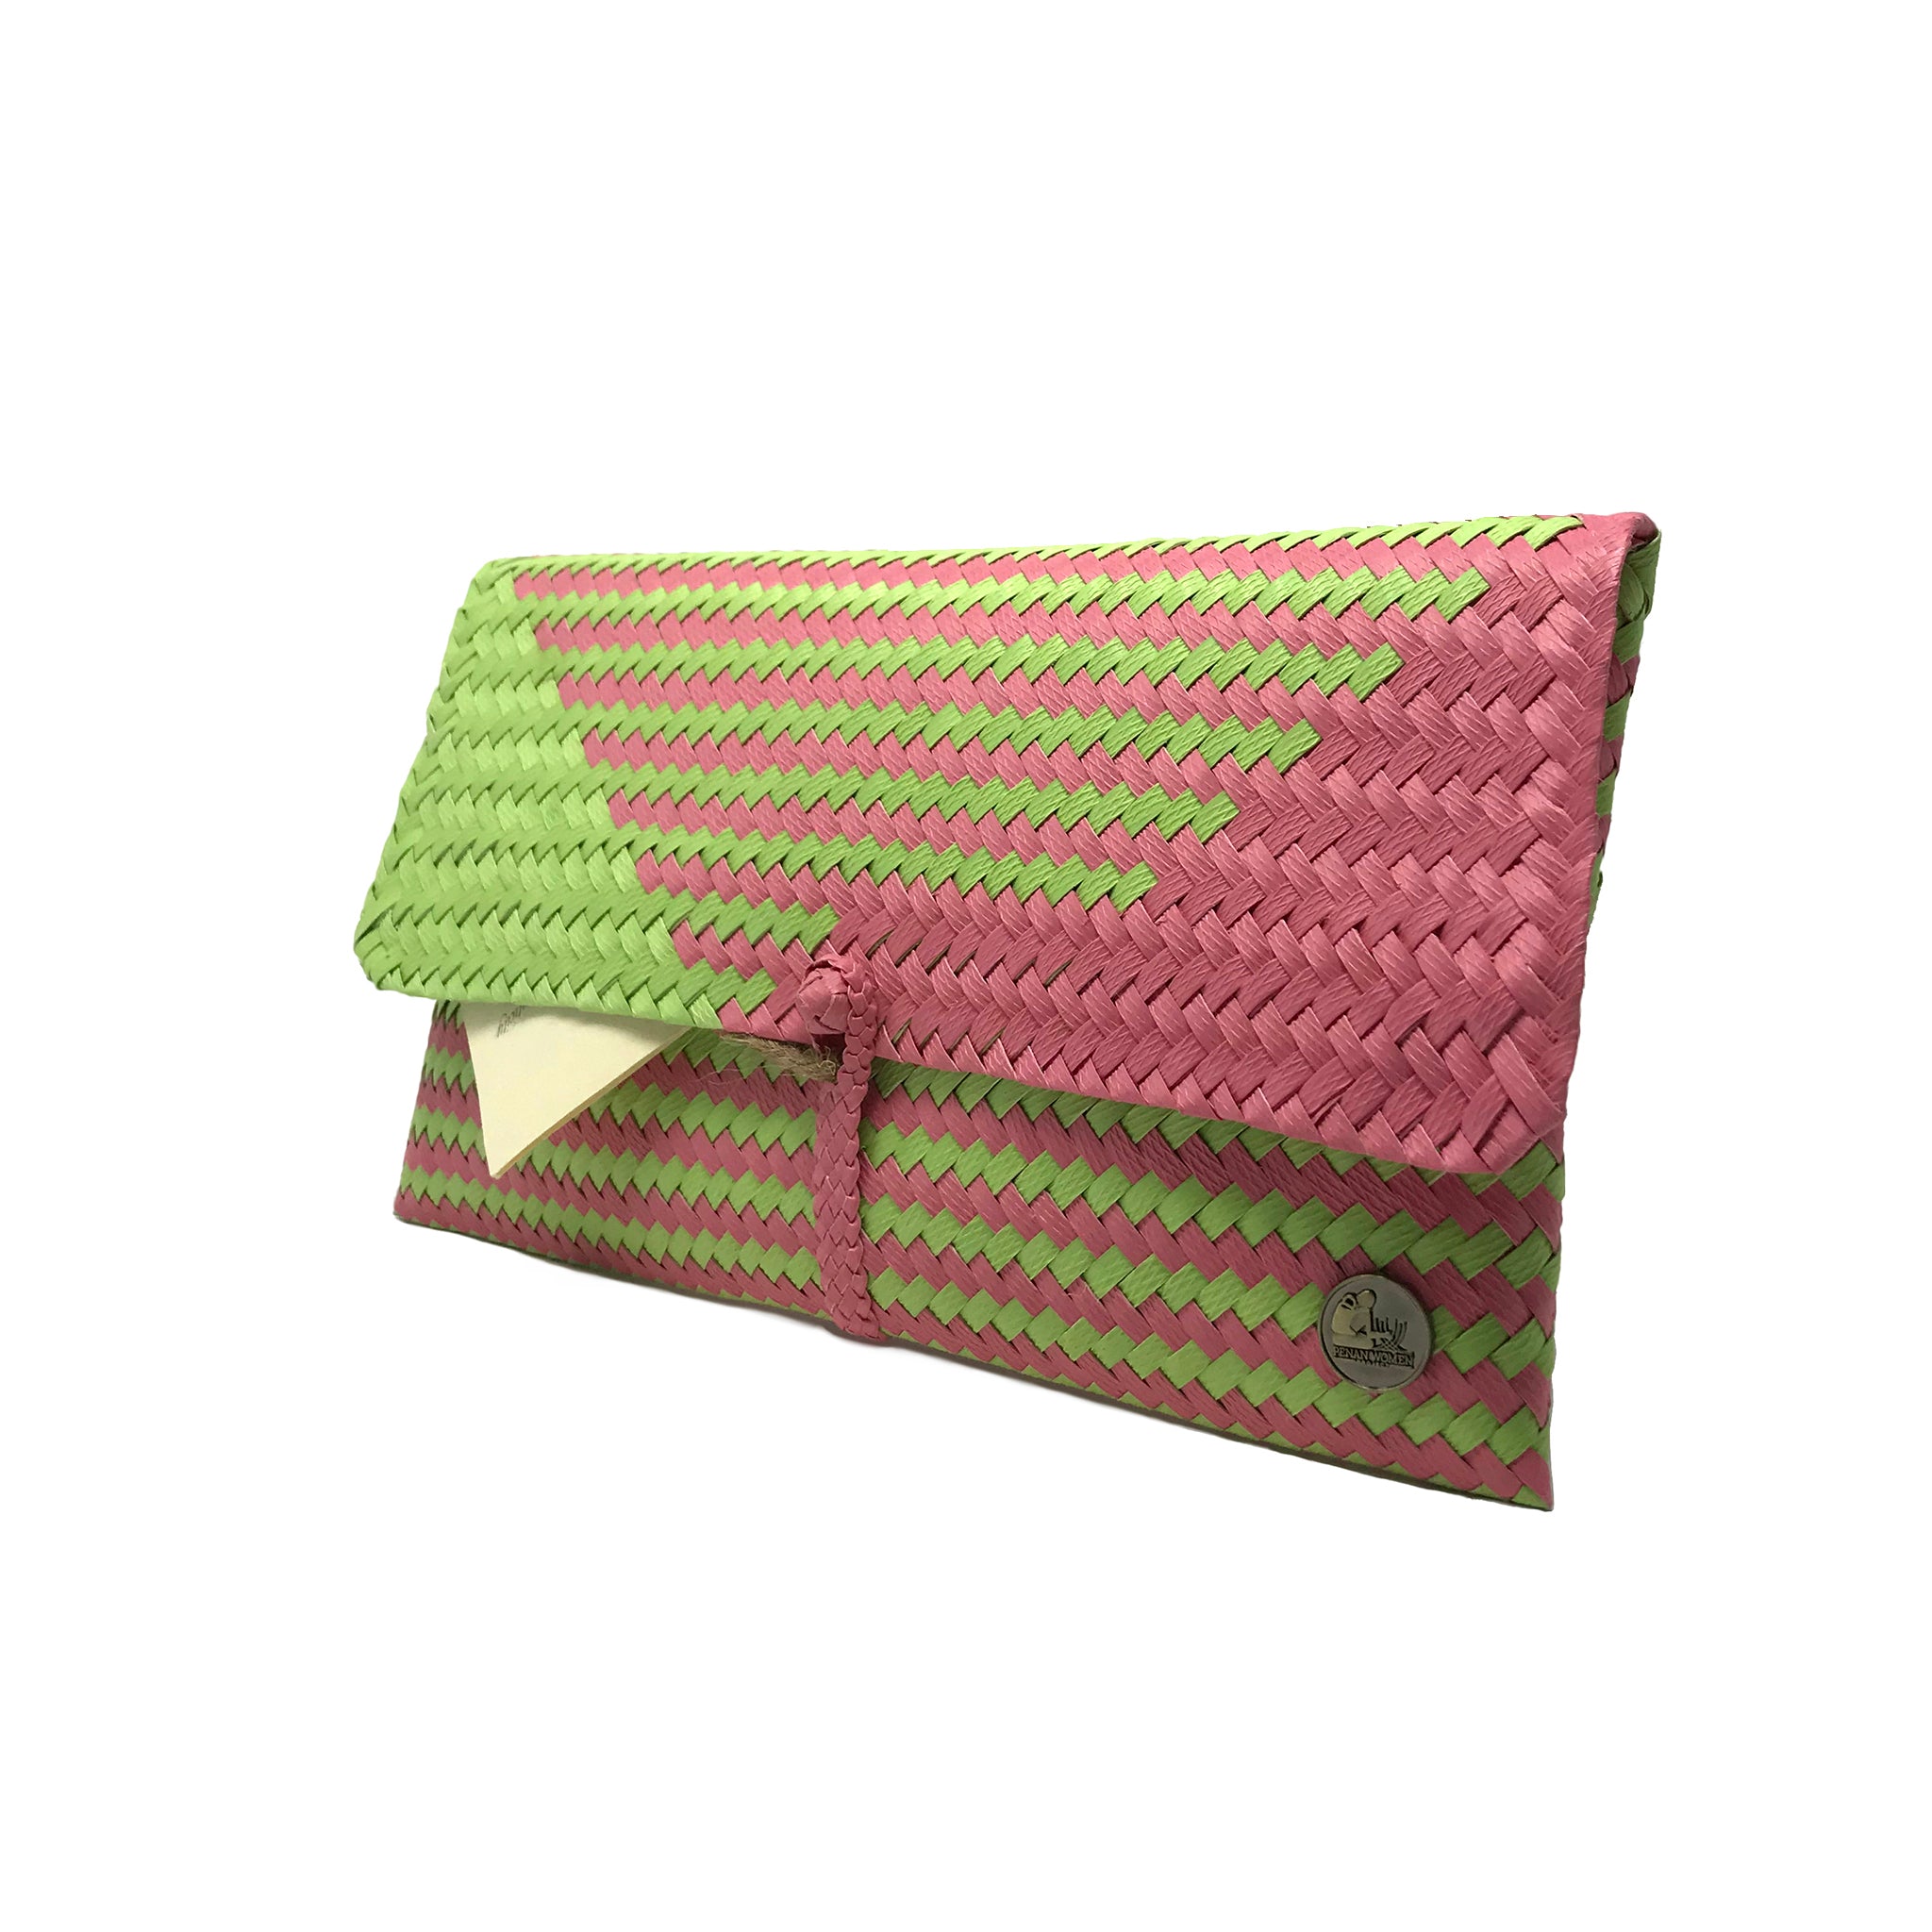 Lime green and magenta clutch at a 45-degree angle.